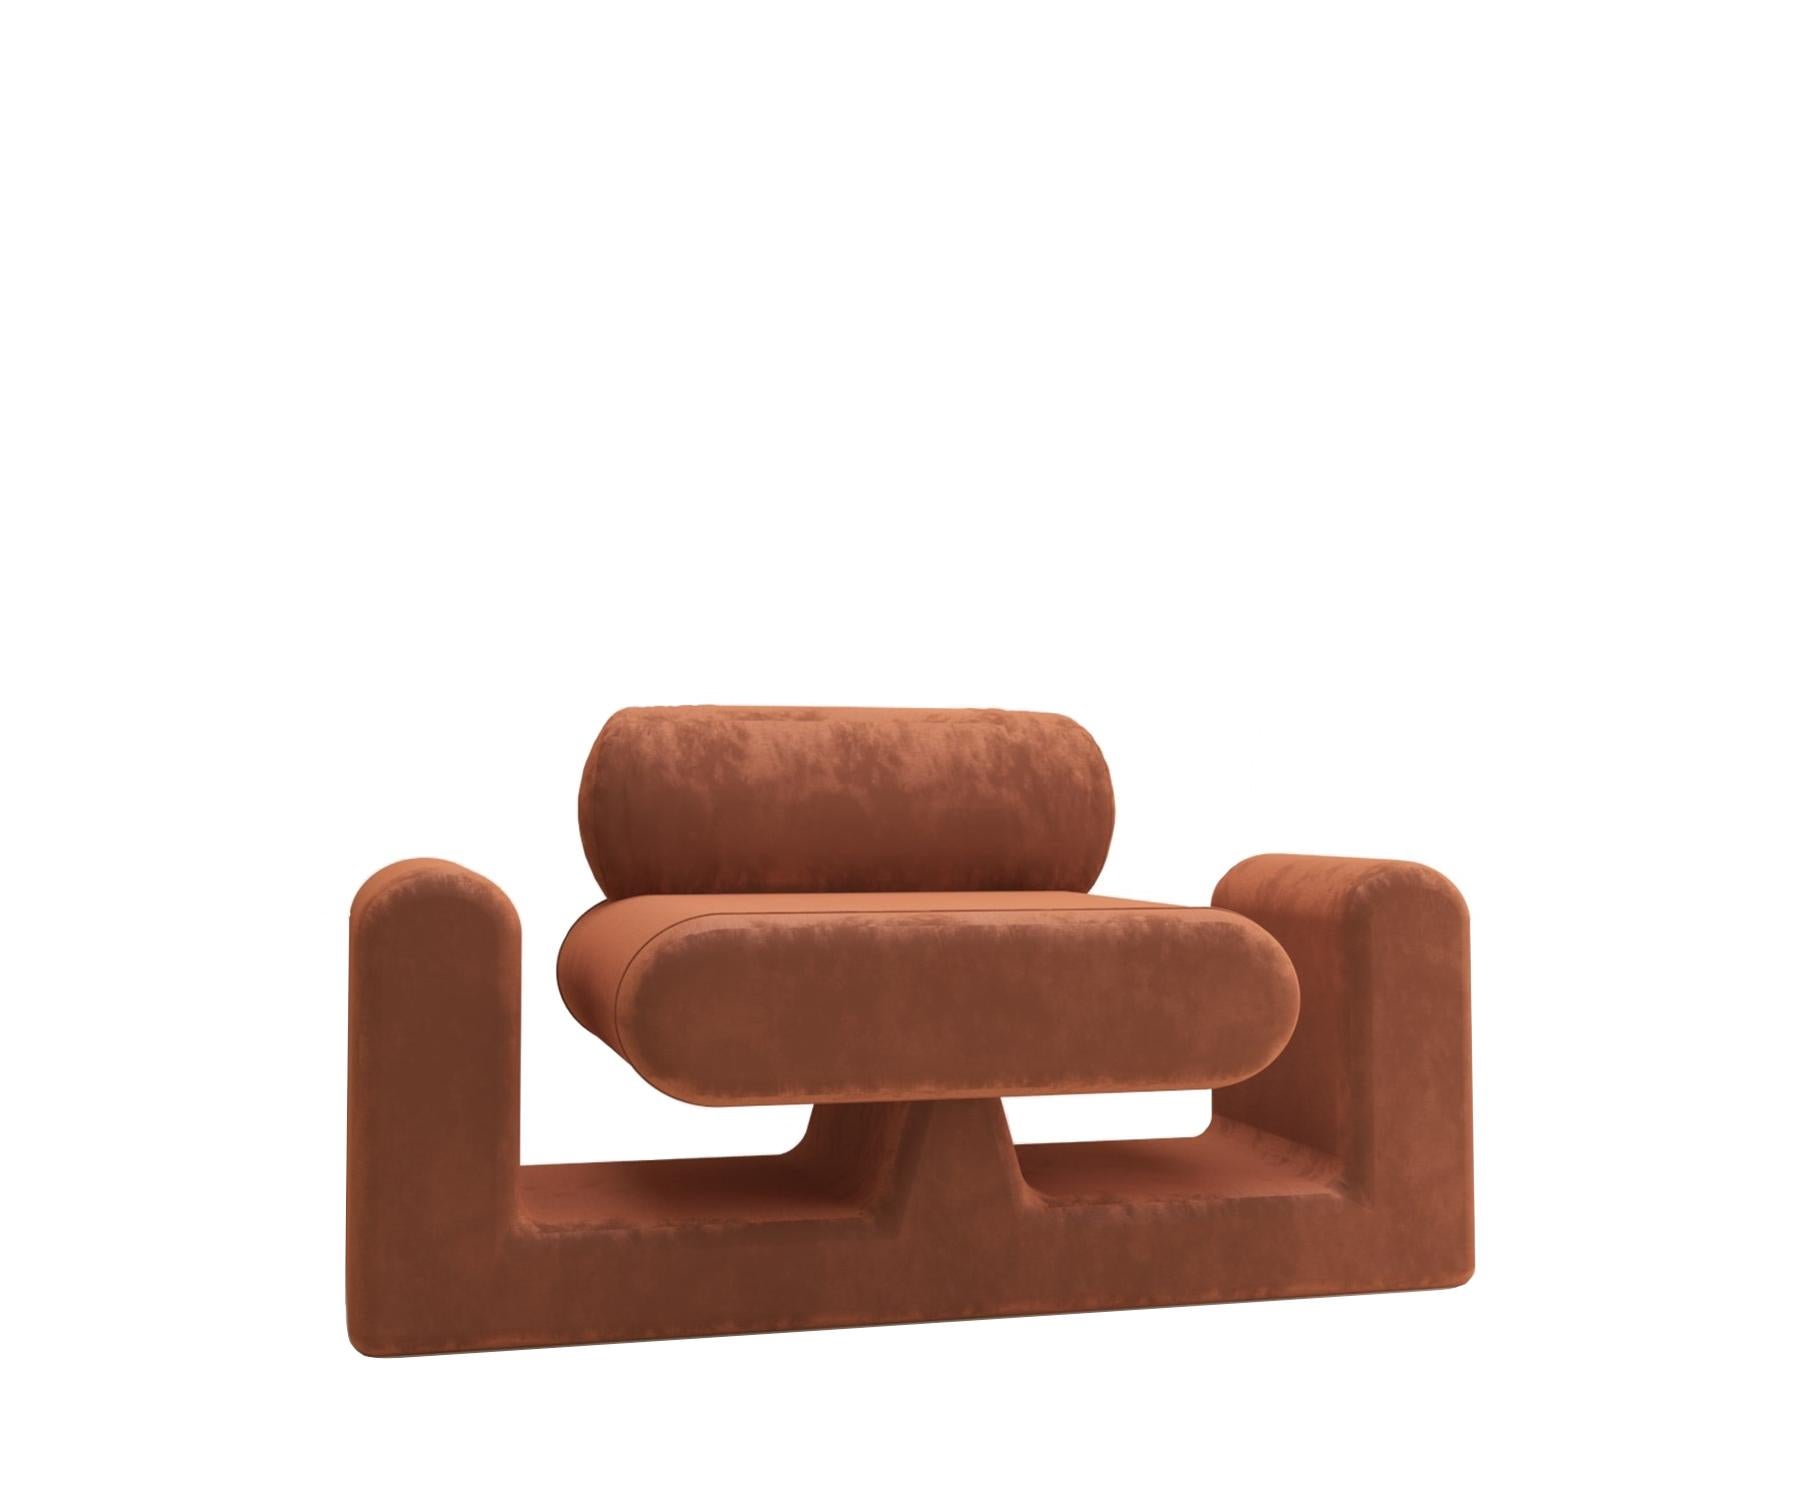 Hug Brown Chair by Rejo Studio
Dimensions: D 115 x W 70 x H 70 cm
Materials: Wooden structure, with Velvet or silk
Also Available in different colours. 

We designed the chair to feel as if you are being embraced by your own world,
in spite of